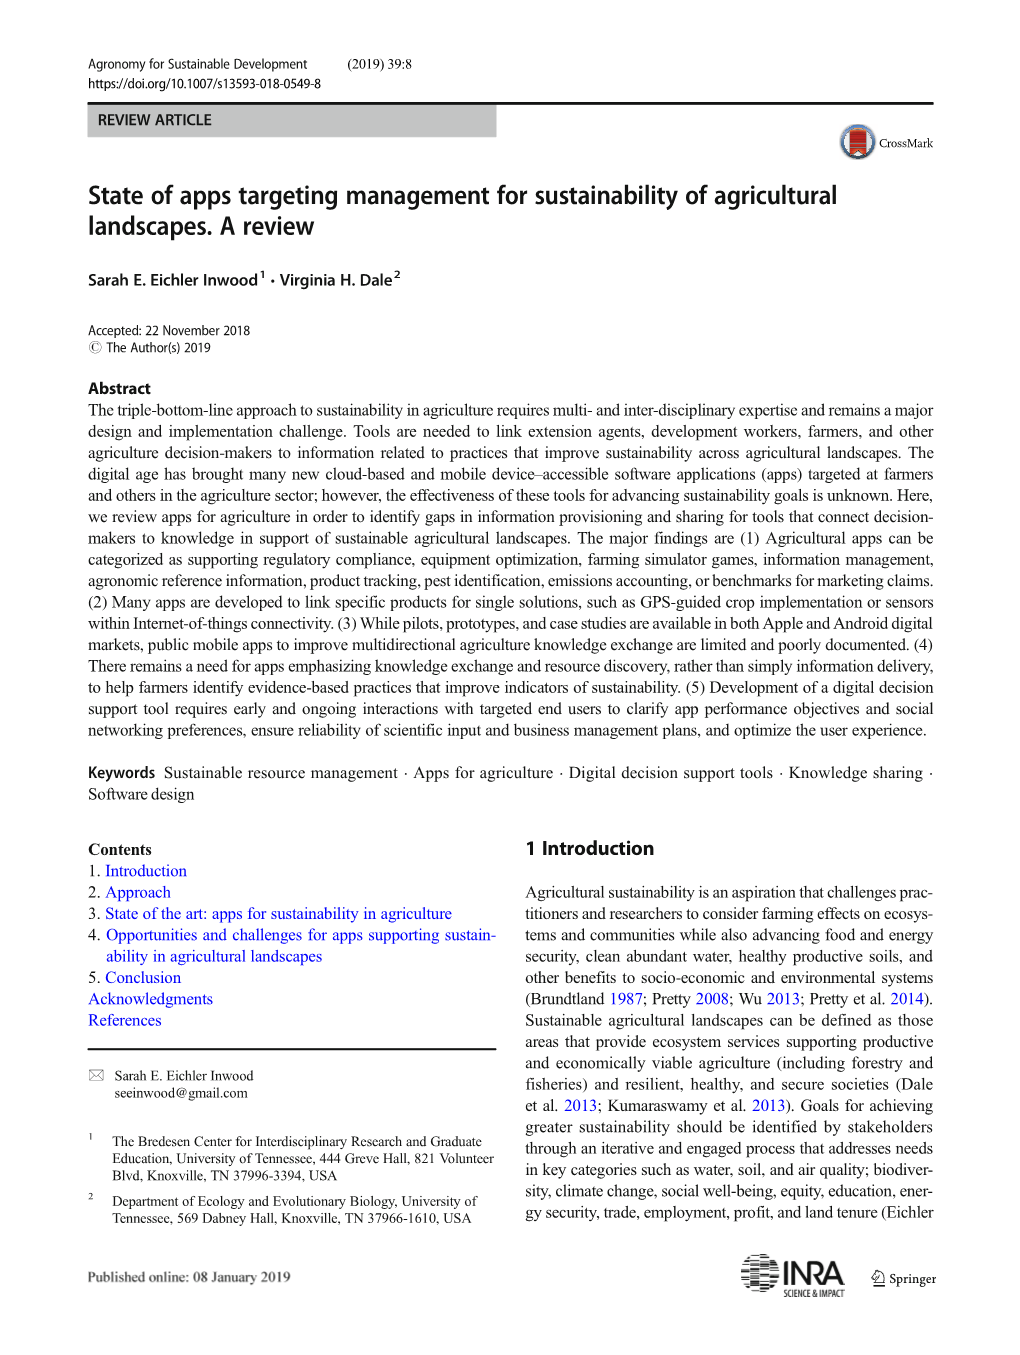 State of Apps Targeting Management for Sustainability of Agricultural Landscapes